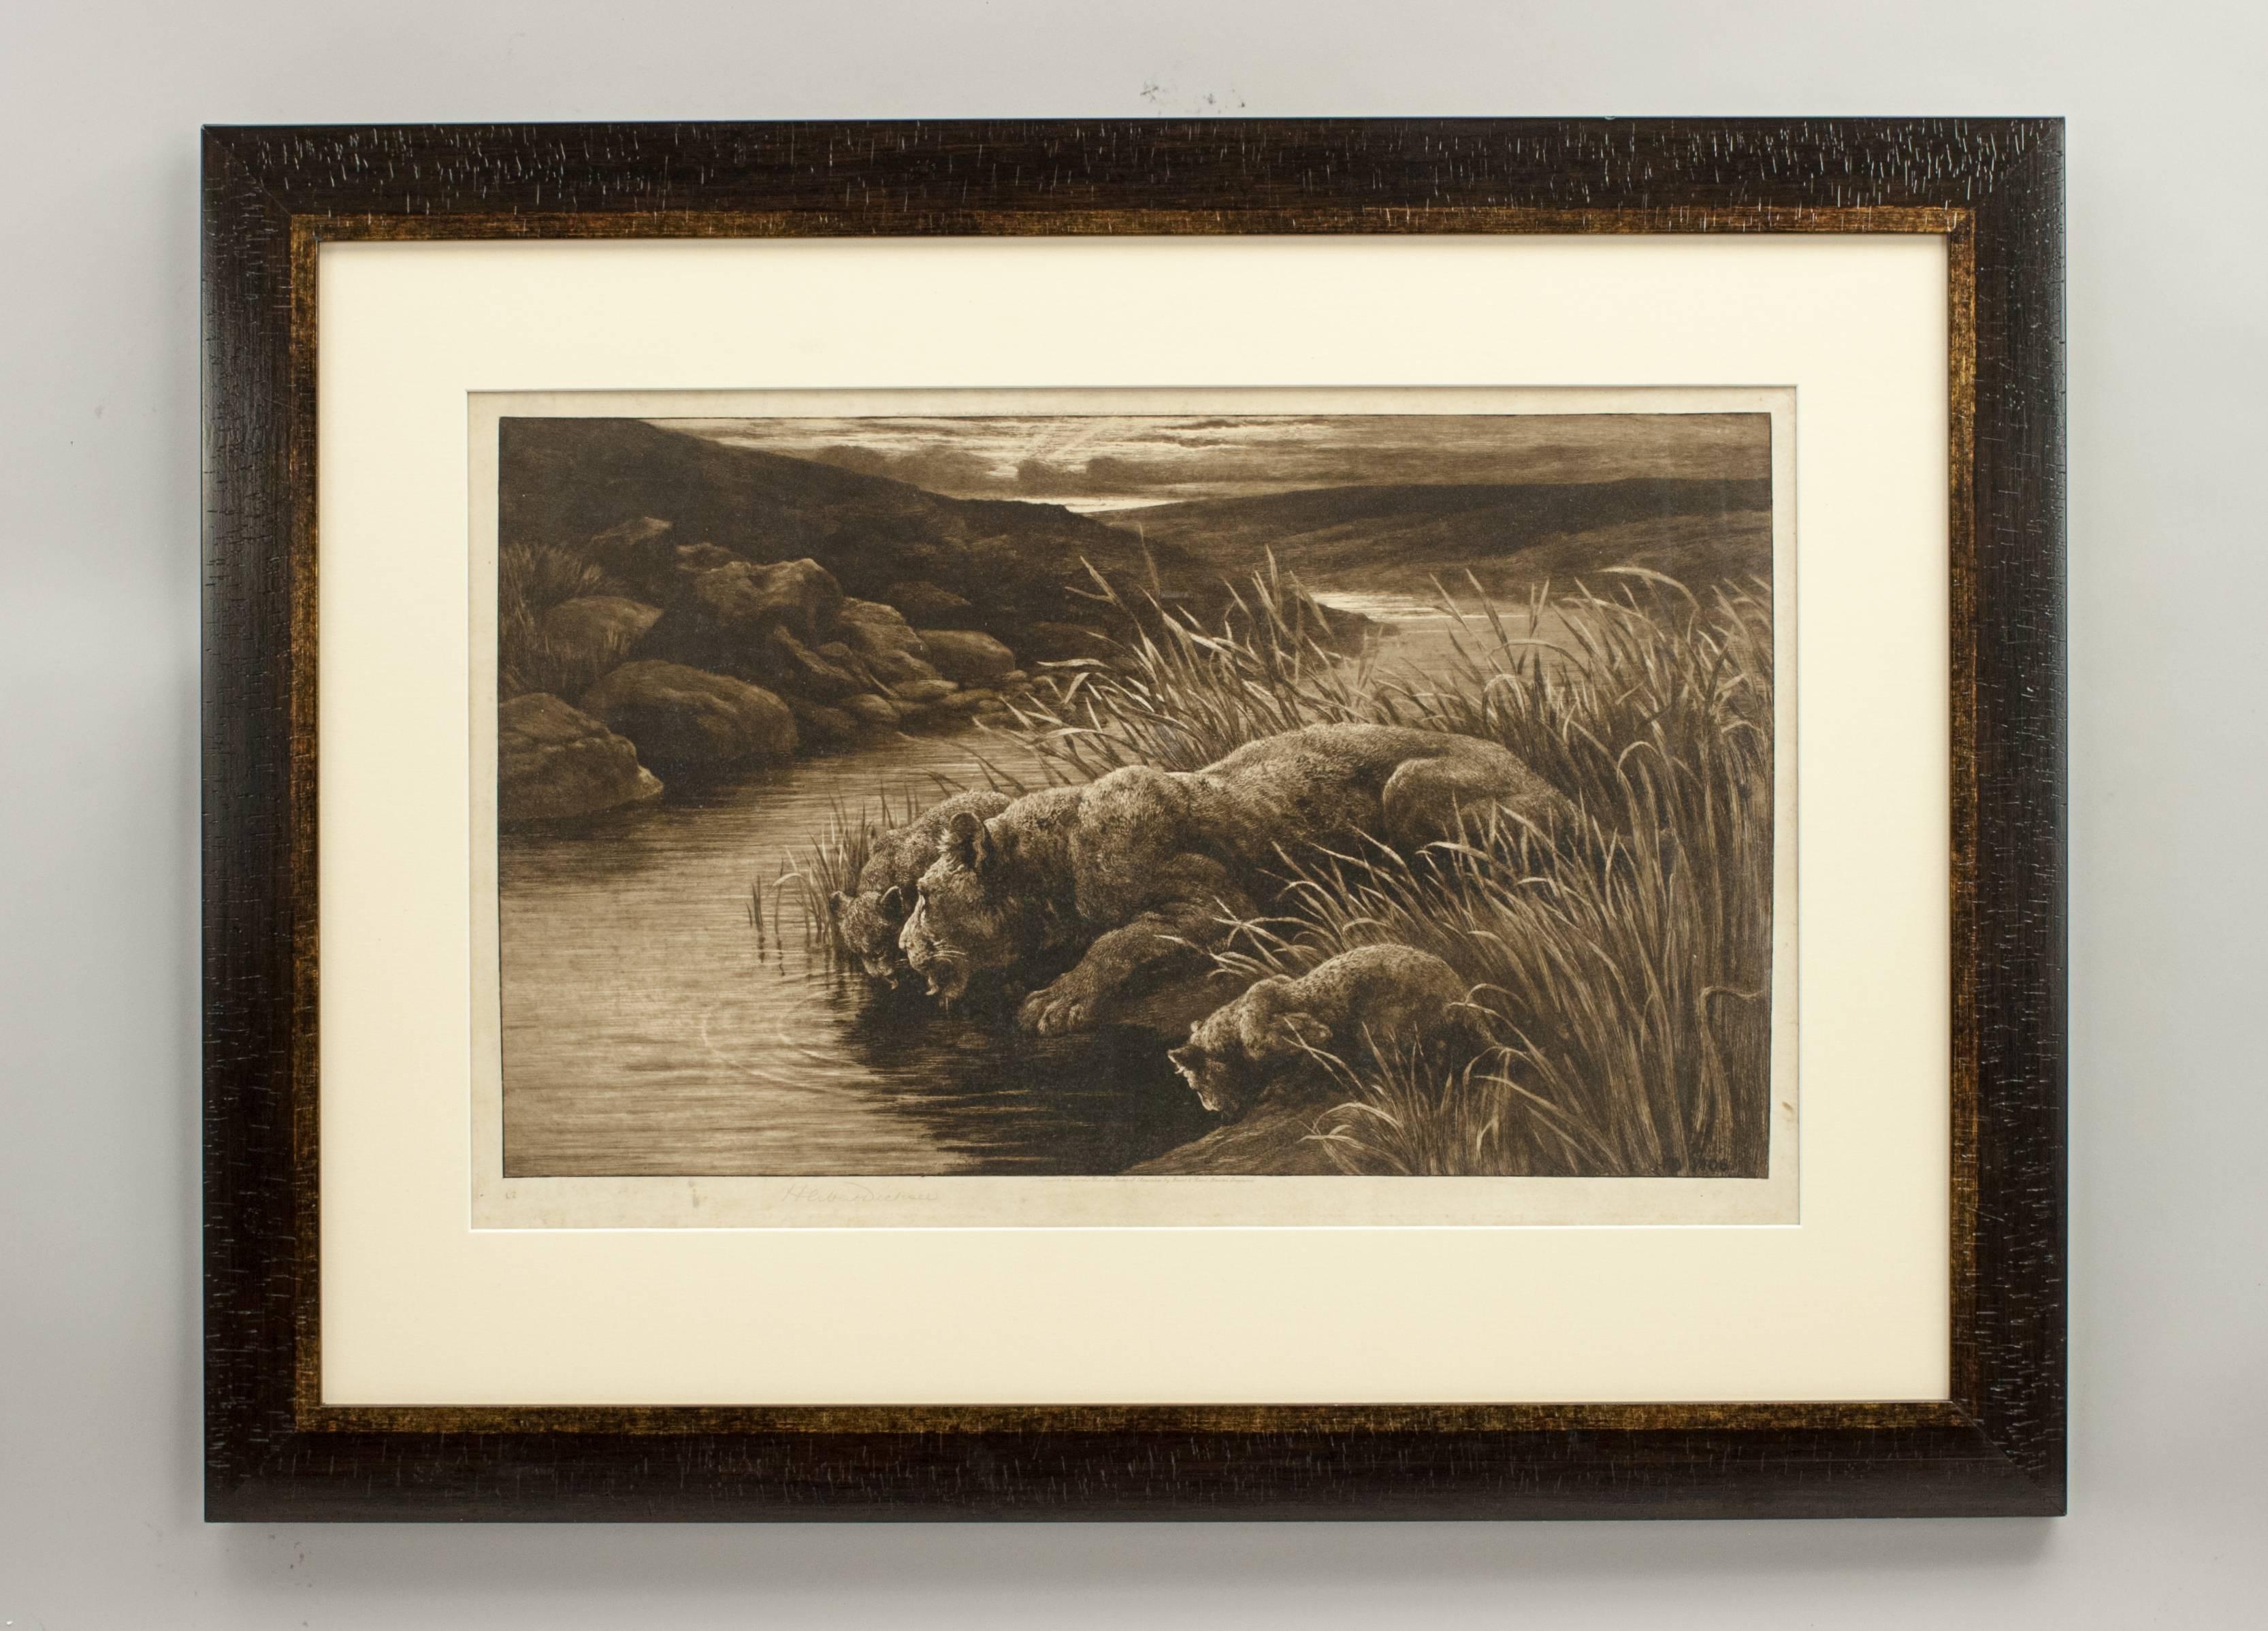 Lion etching, peace.
A great powerful framed image of a lioness with her two cubs on the riverbank drinking from the river. The wildlife etching is after the original by Herbert Dicksee, published 1906 by Frost & Reed. The picture is signed in